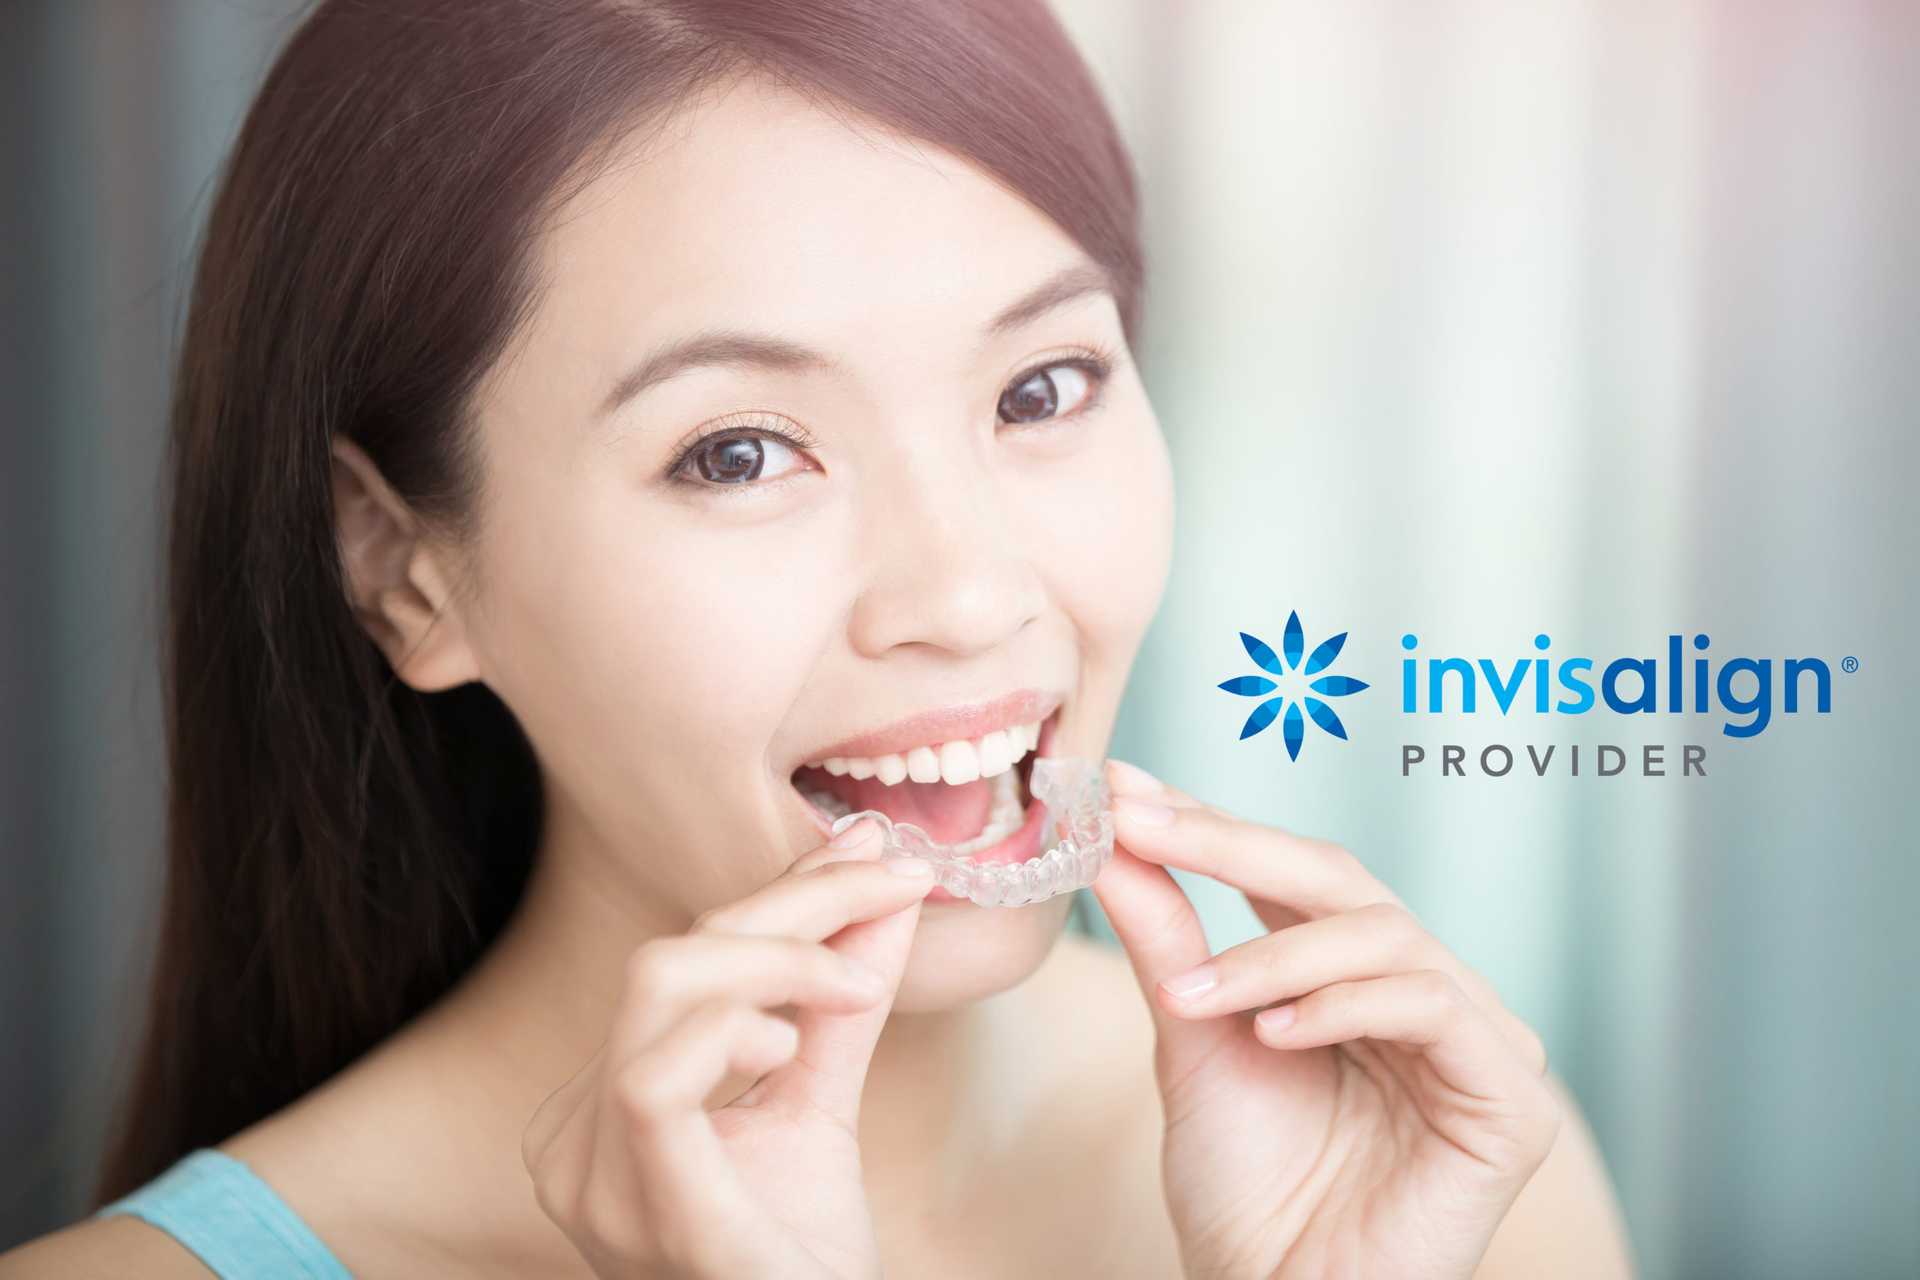 woman holding invisalign retainer up to mouth